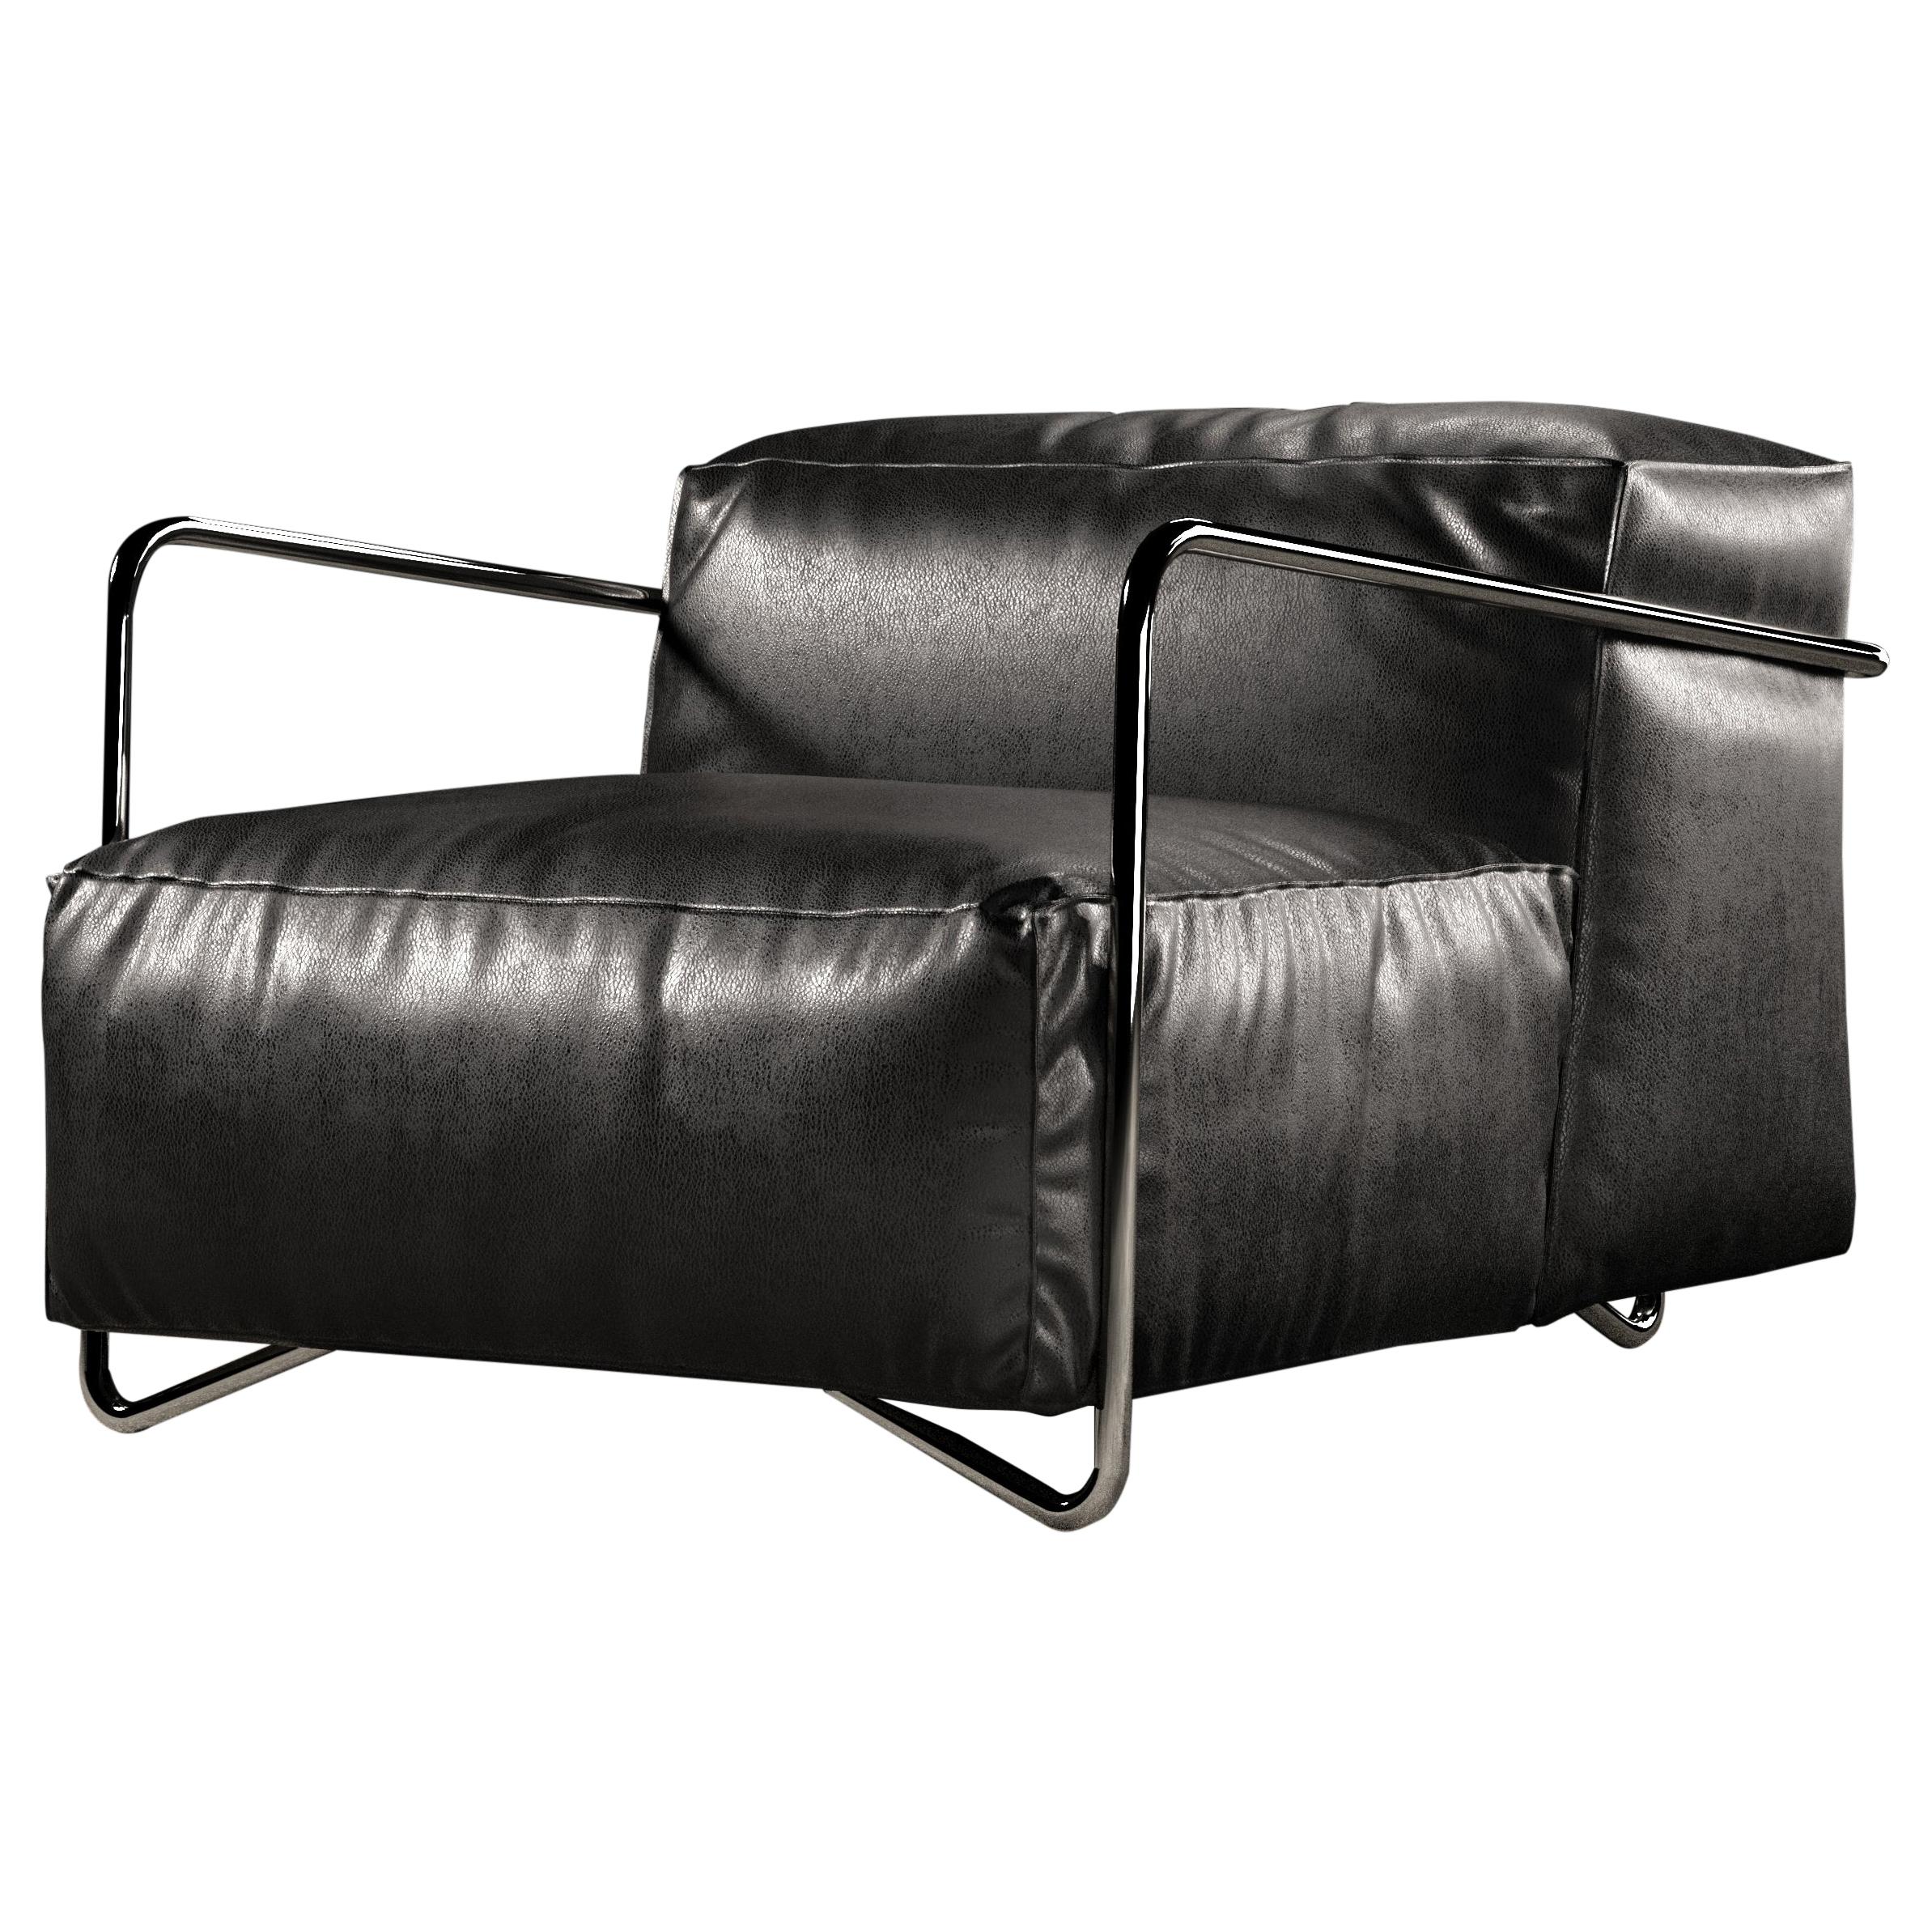 JE T'attends Armchair Black Leather